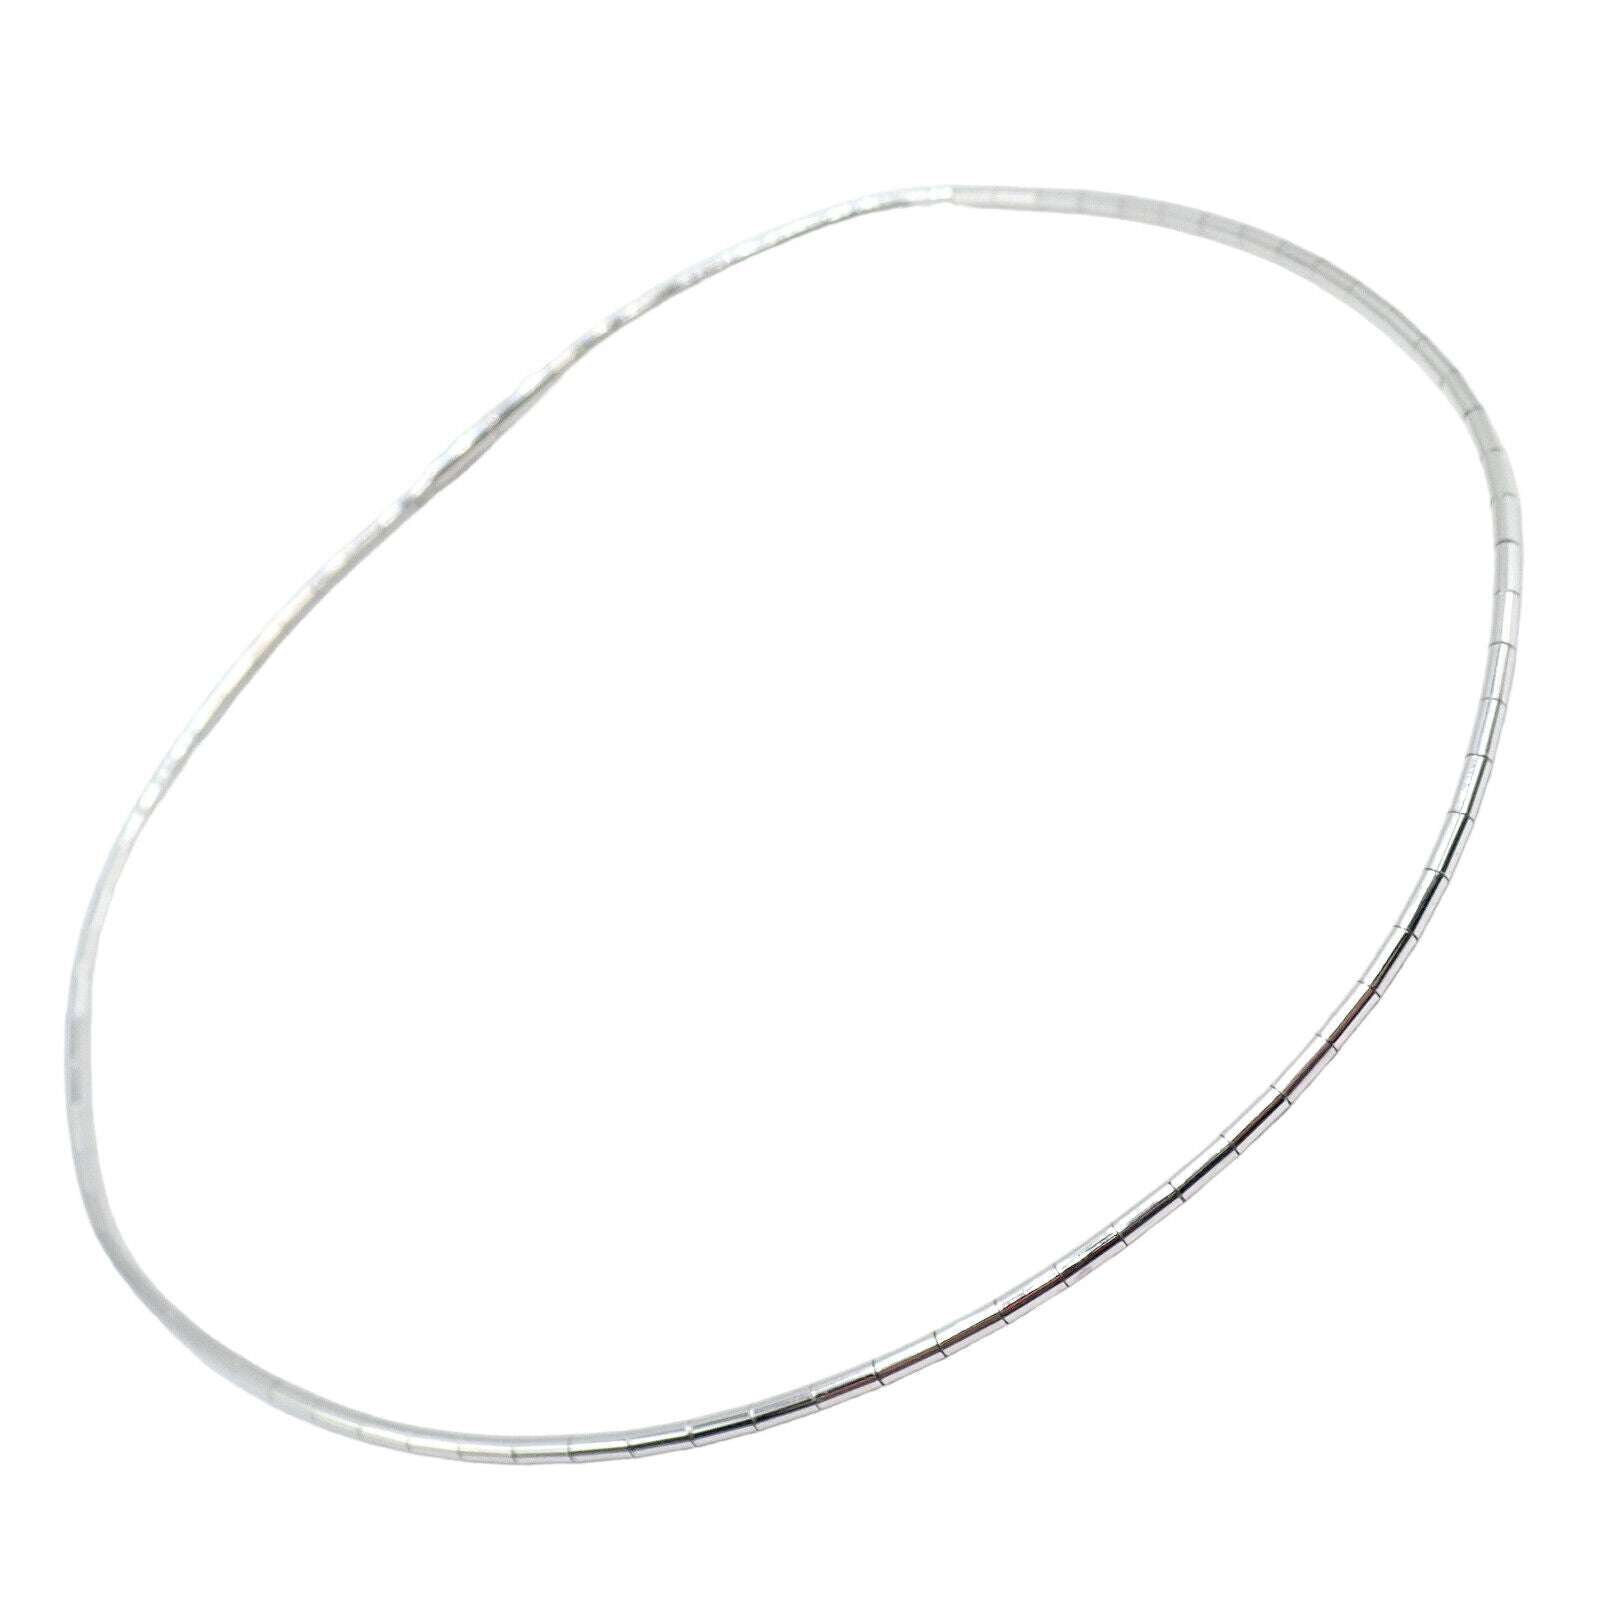 Cartier Jewelry & Watches:Fine Jewelry:Necklaces & Pendants Authentic! Vintage Cartier 18k White Gold Tube Omega Choker Necklace